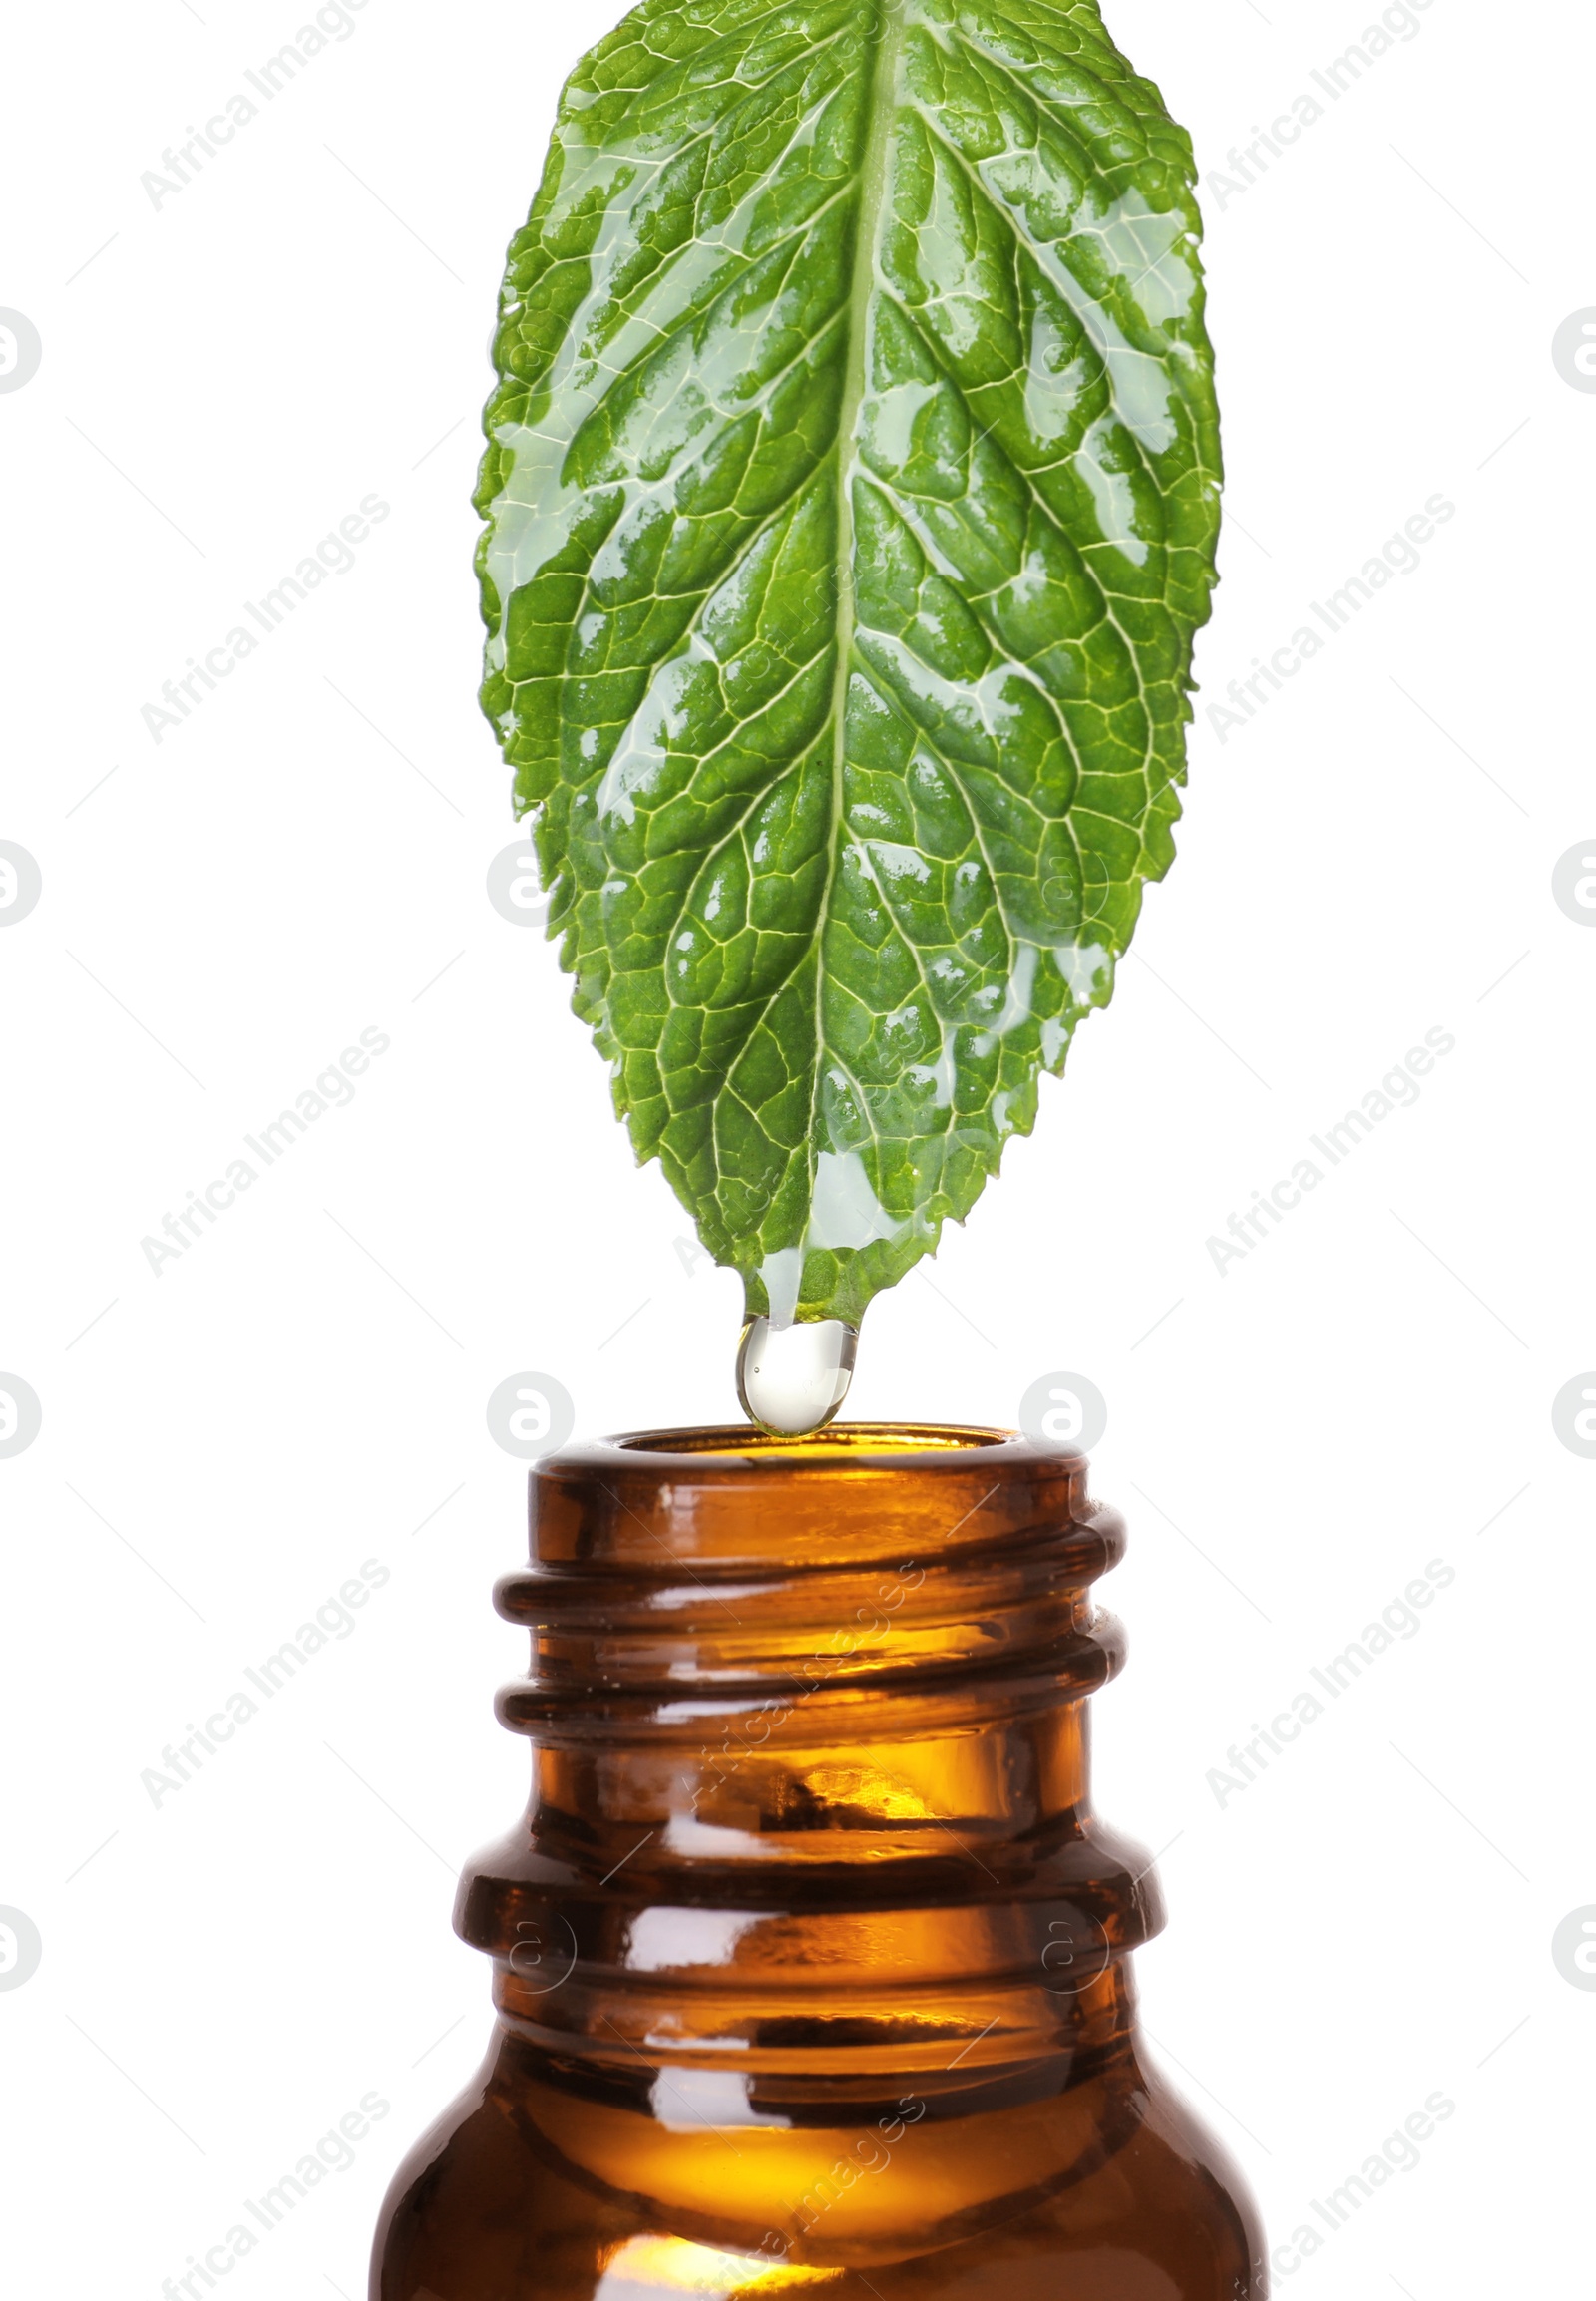 Photo of Mint leaf with drop of essential oil over bottle against white background